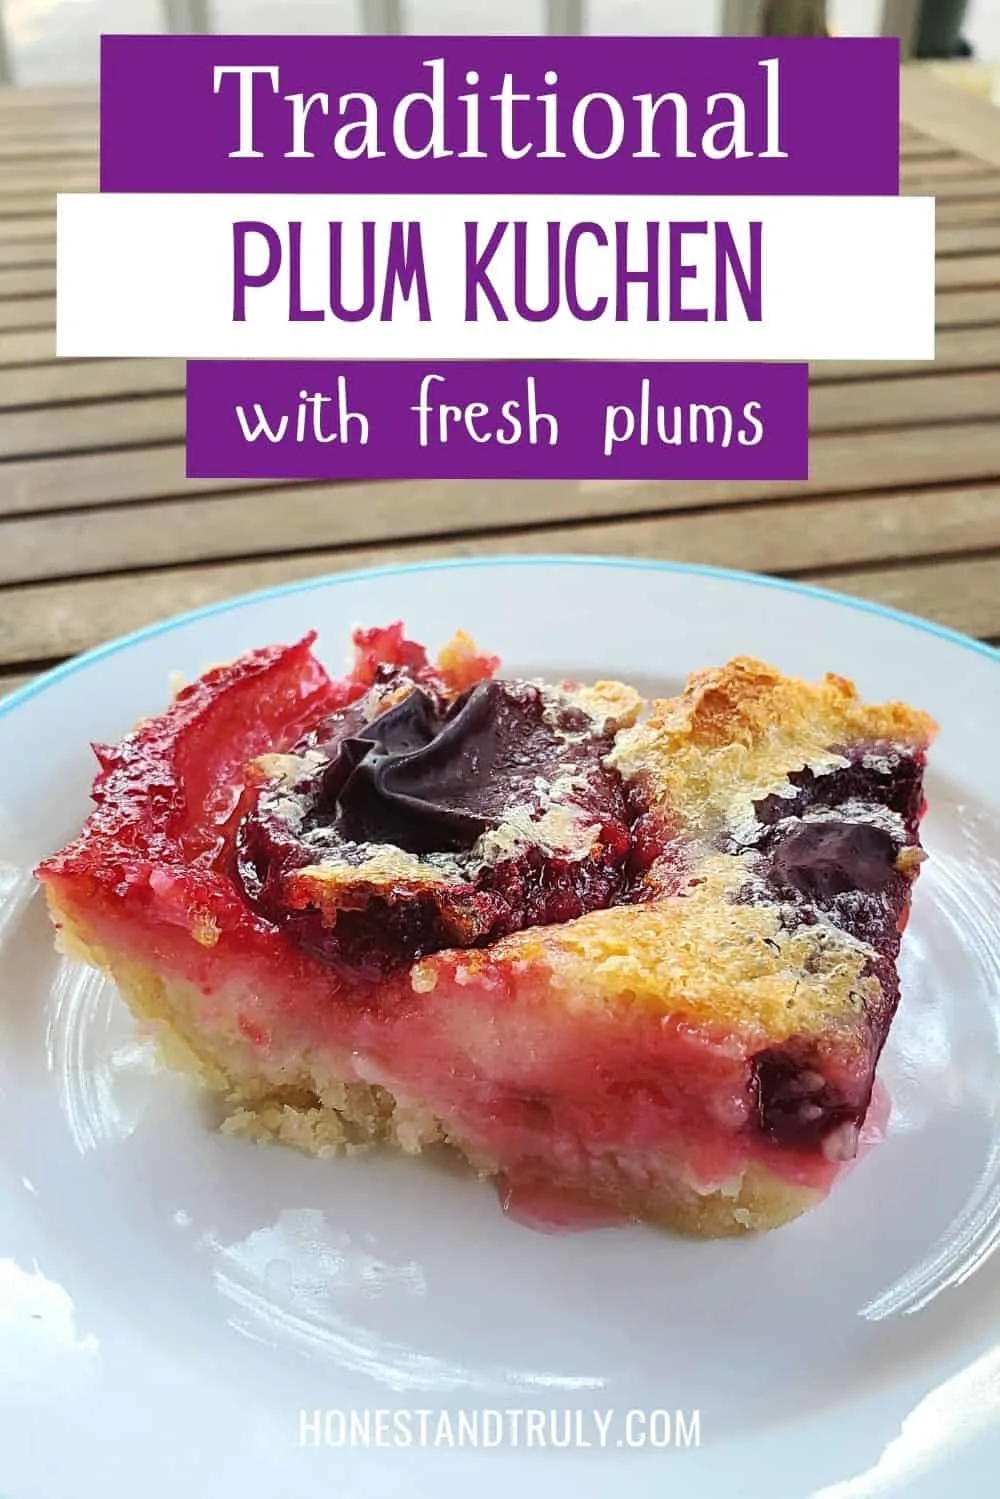 Side on shot of plum kuchen on a white plate with text tradtiional plum kuchen with fresh plums.